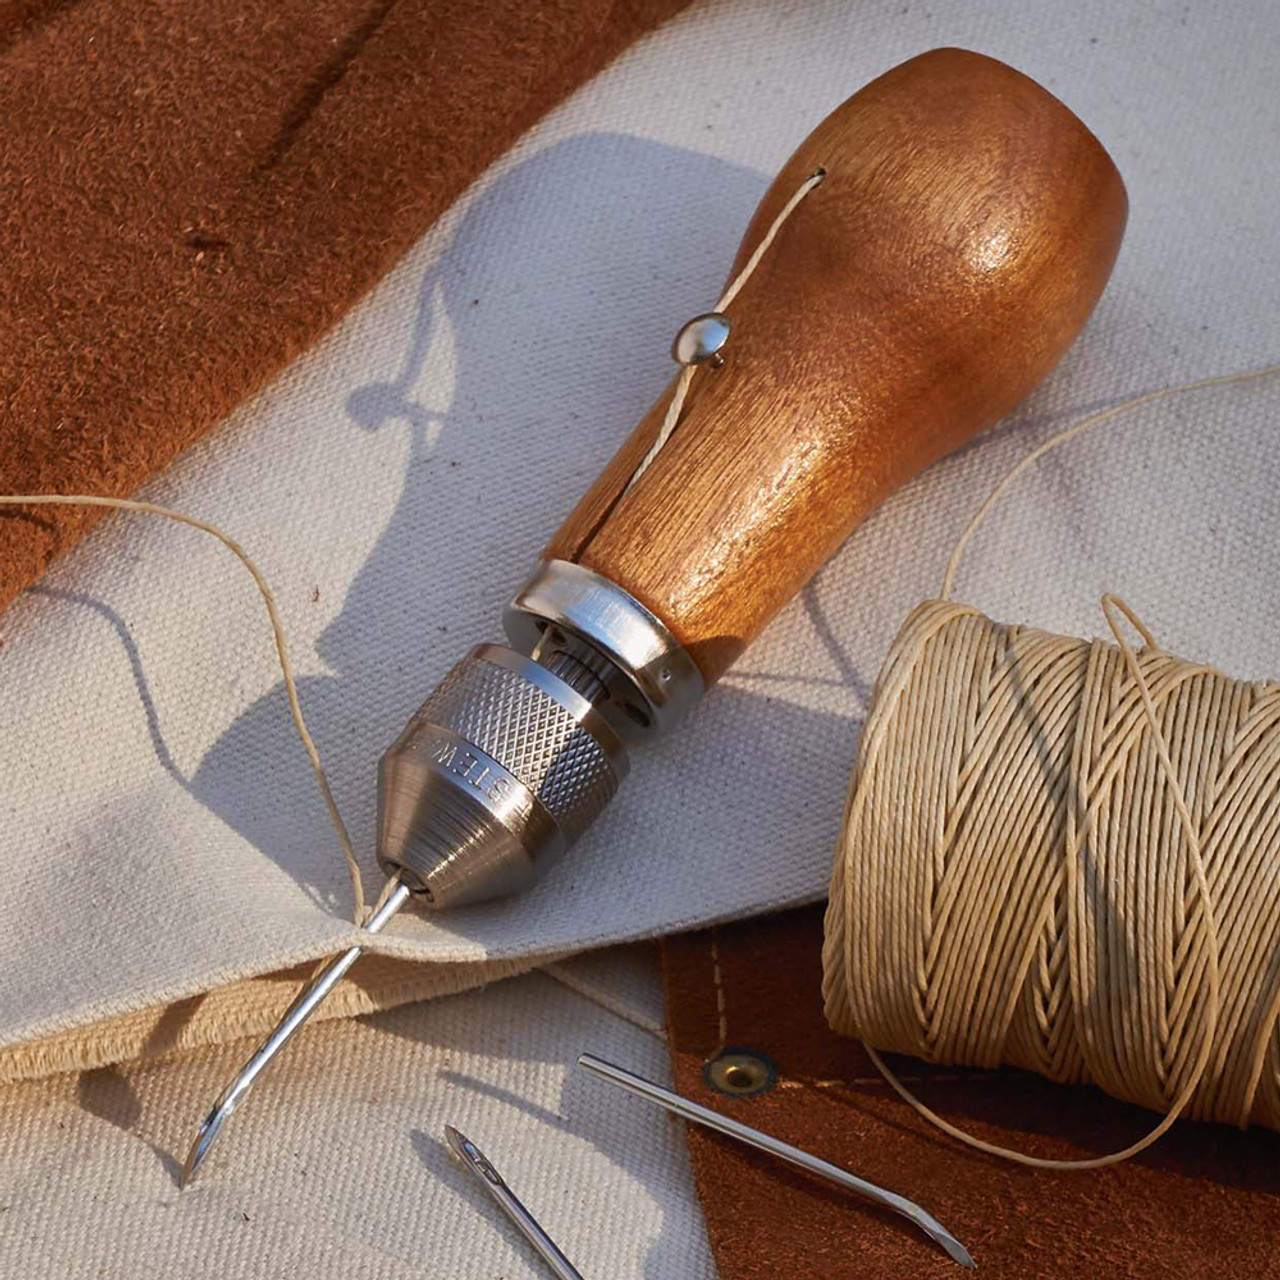 Speedy Stitcher Sewing Awl Tool - Usefull for Sail Repairs